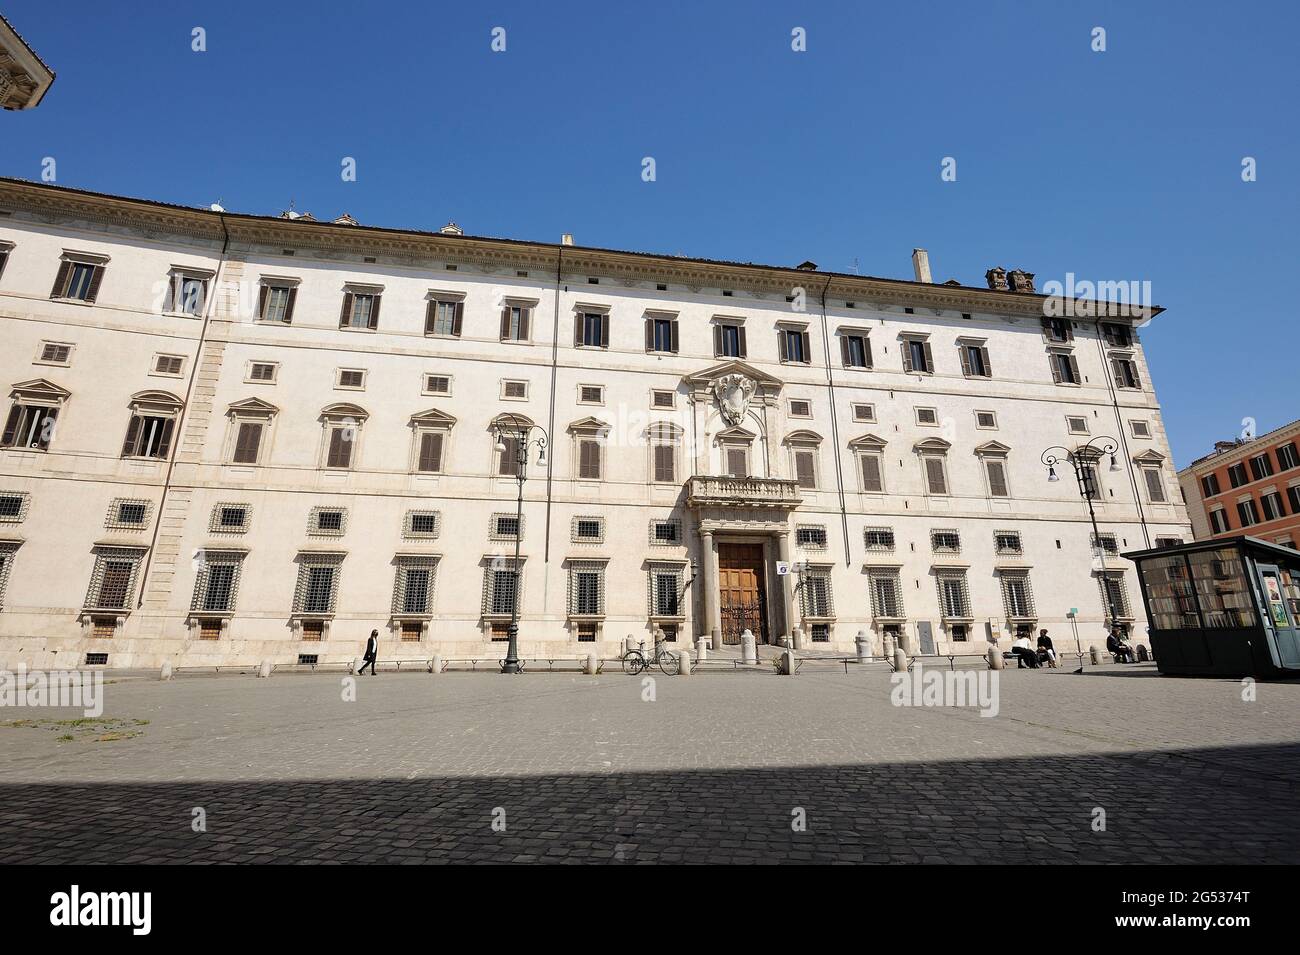 Palazzo Borghese, Piazza Borghese, Rome, Italie Banque D'Images